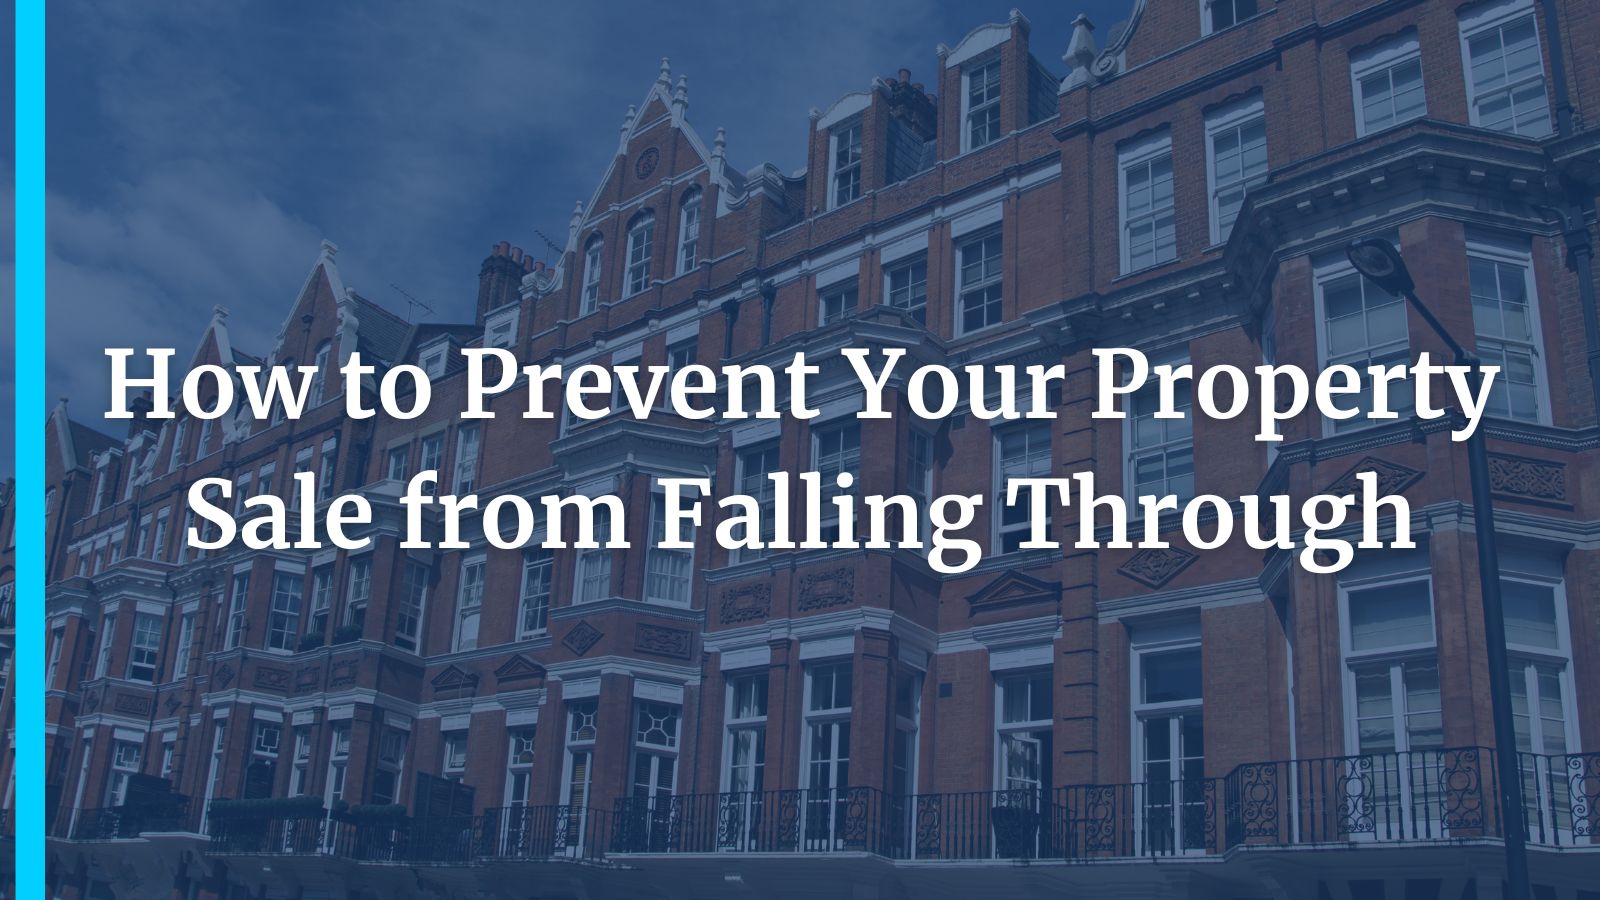 How to Prevent Your Property Sale from Falling Through